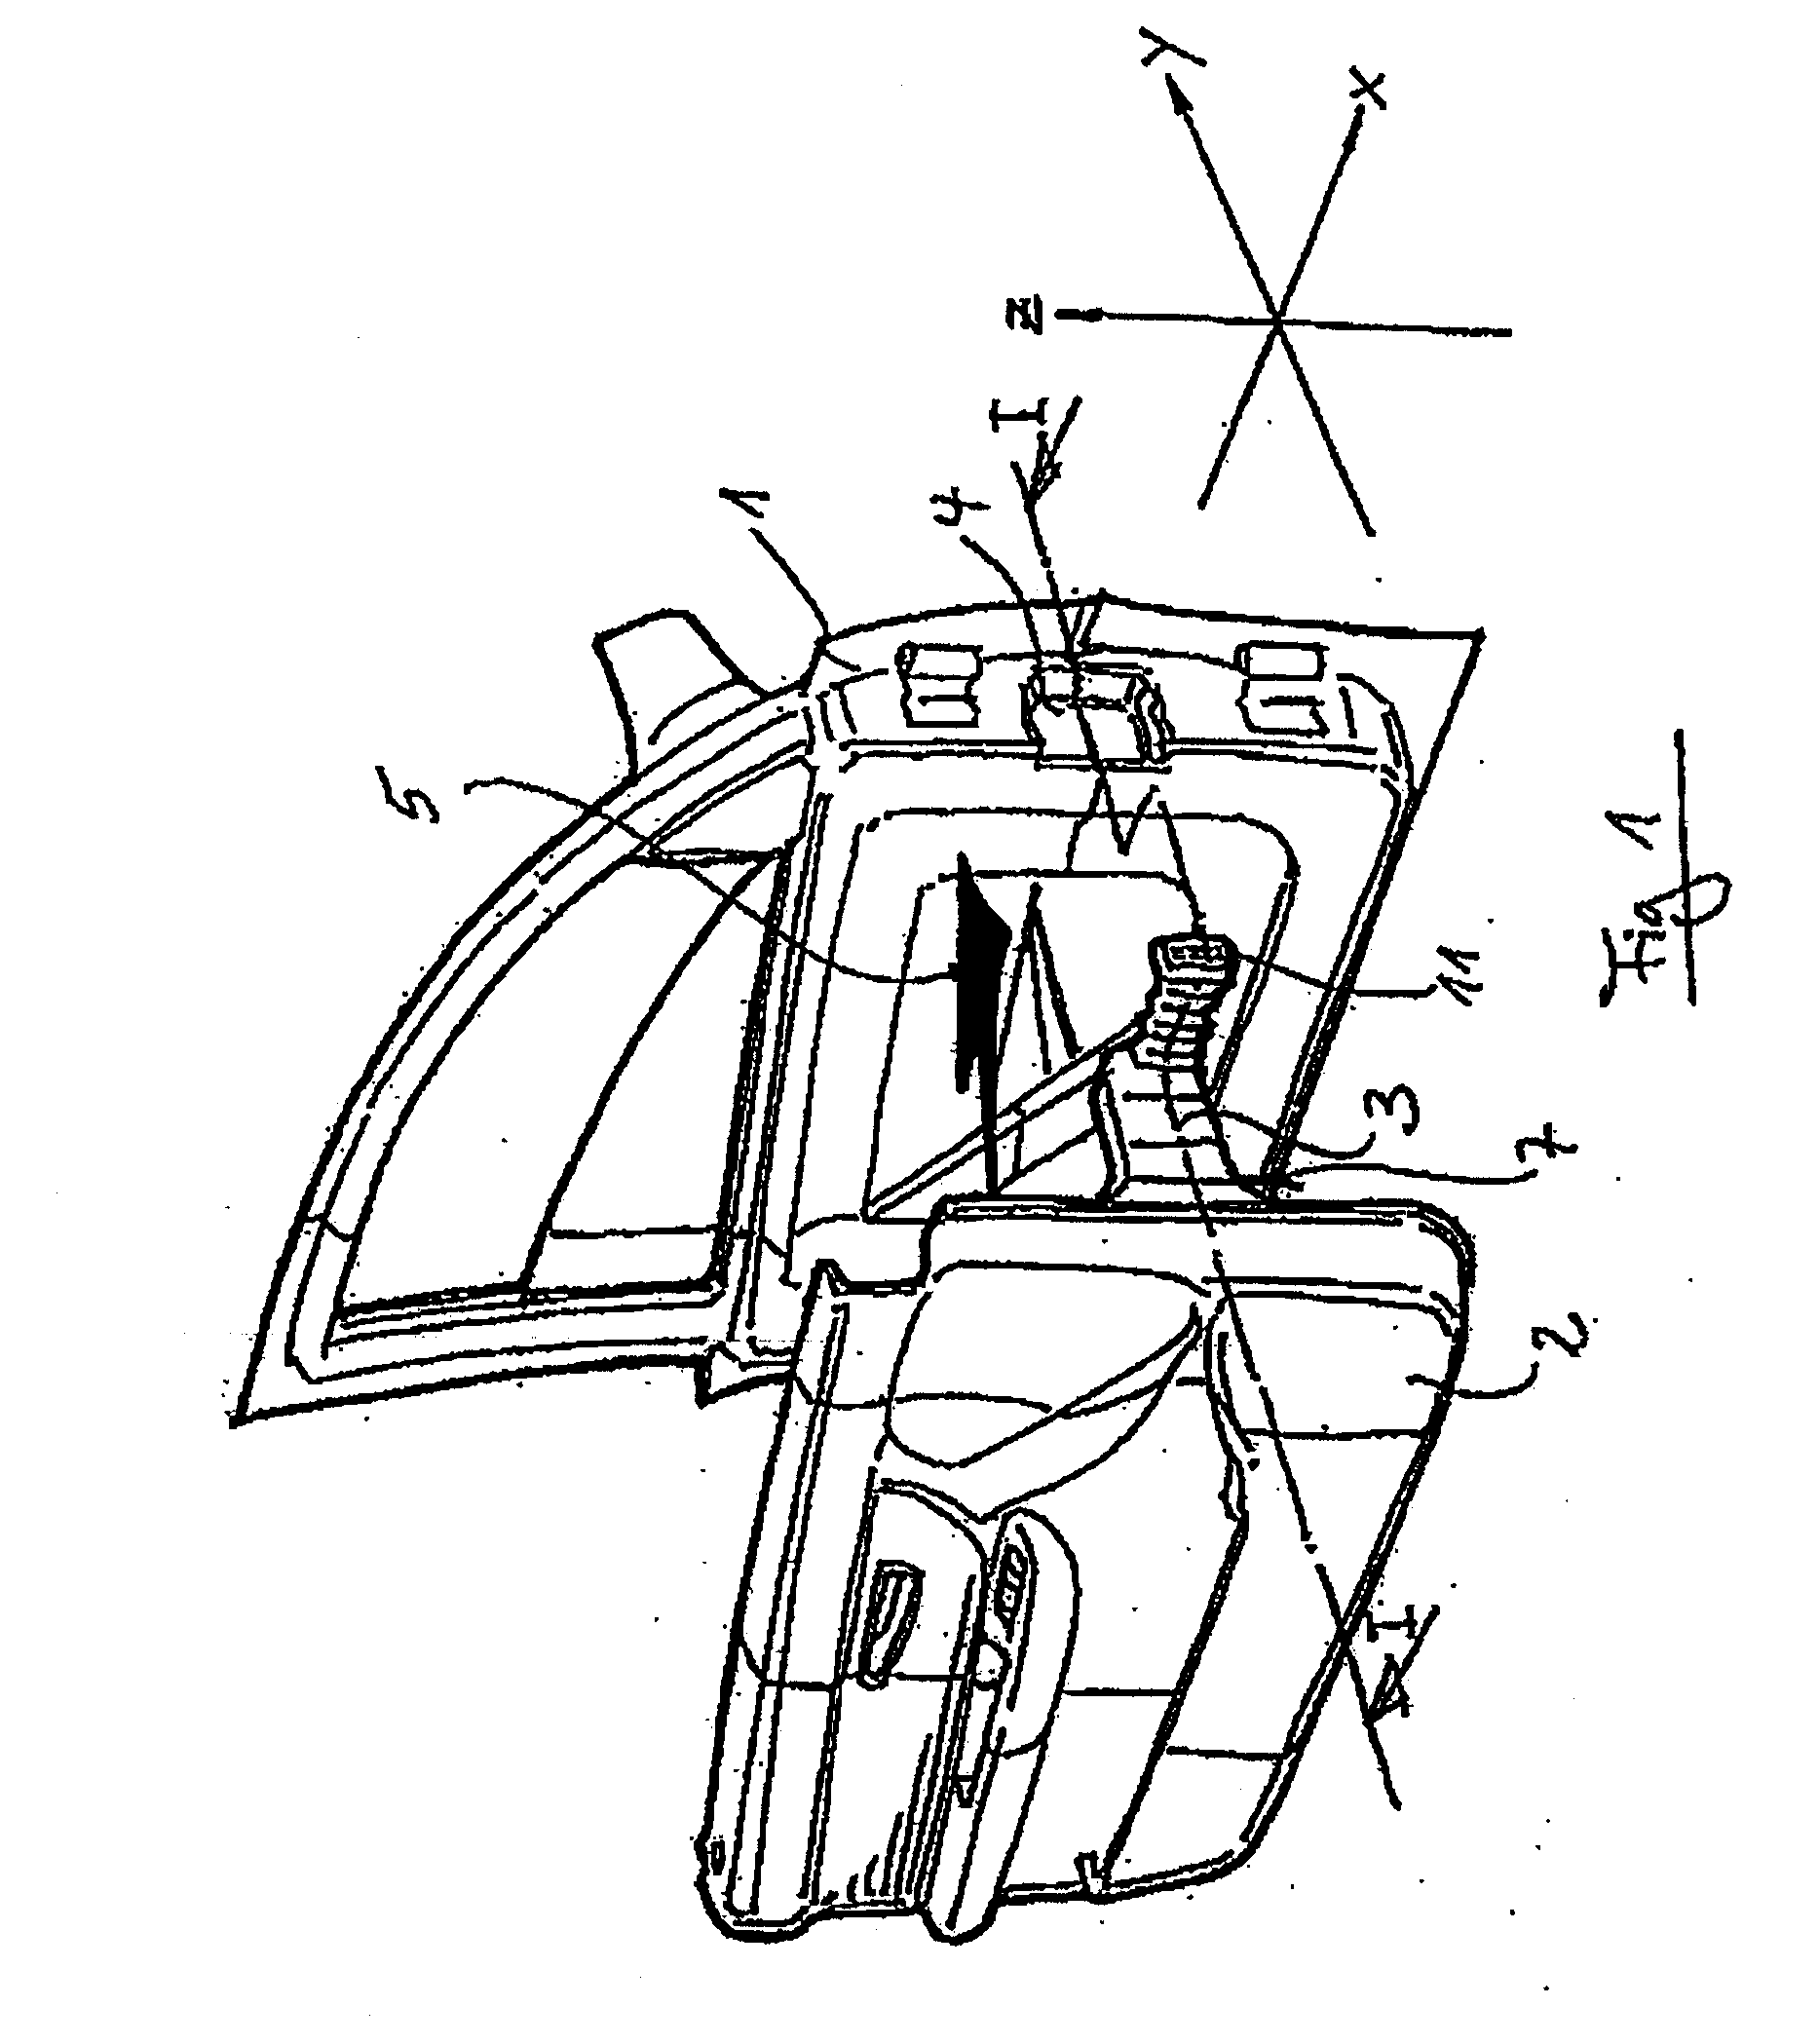 Inner cladding of a motor vehicle door comprising a cable harness